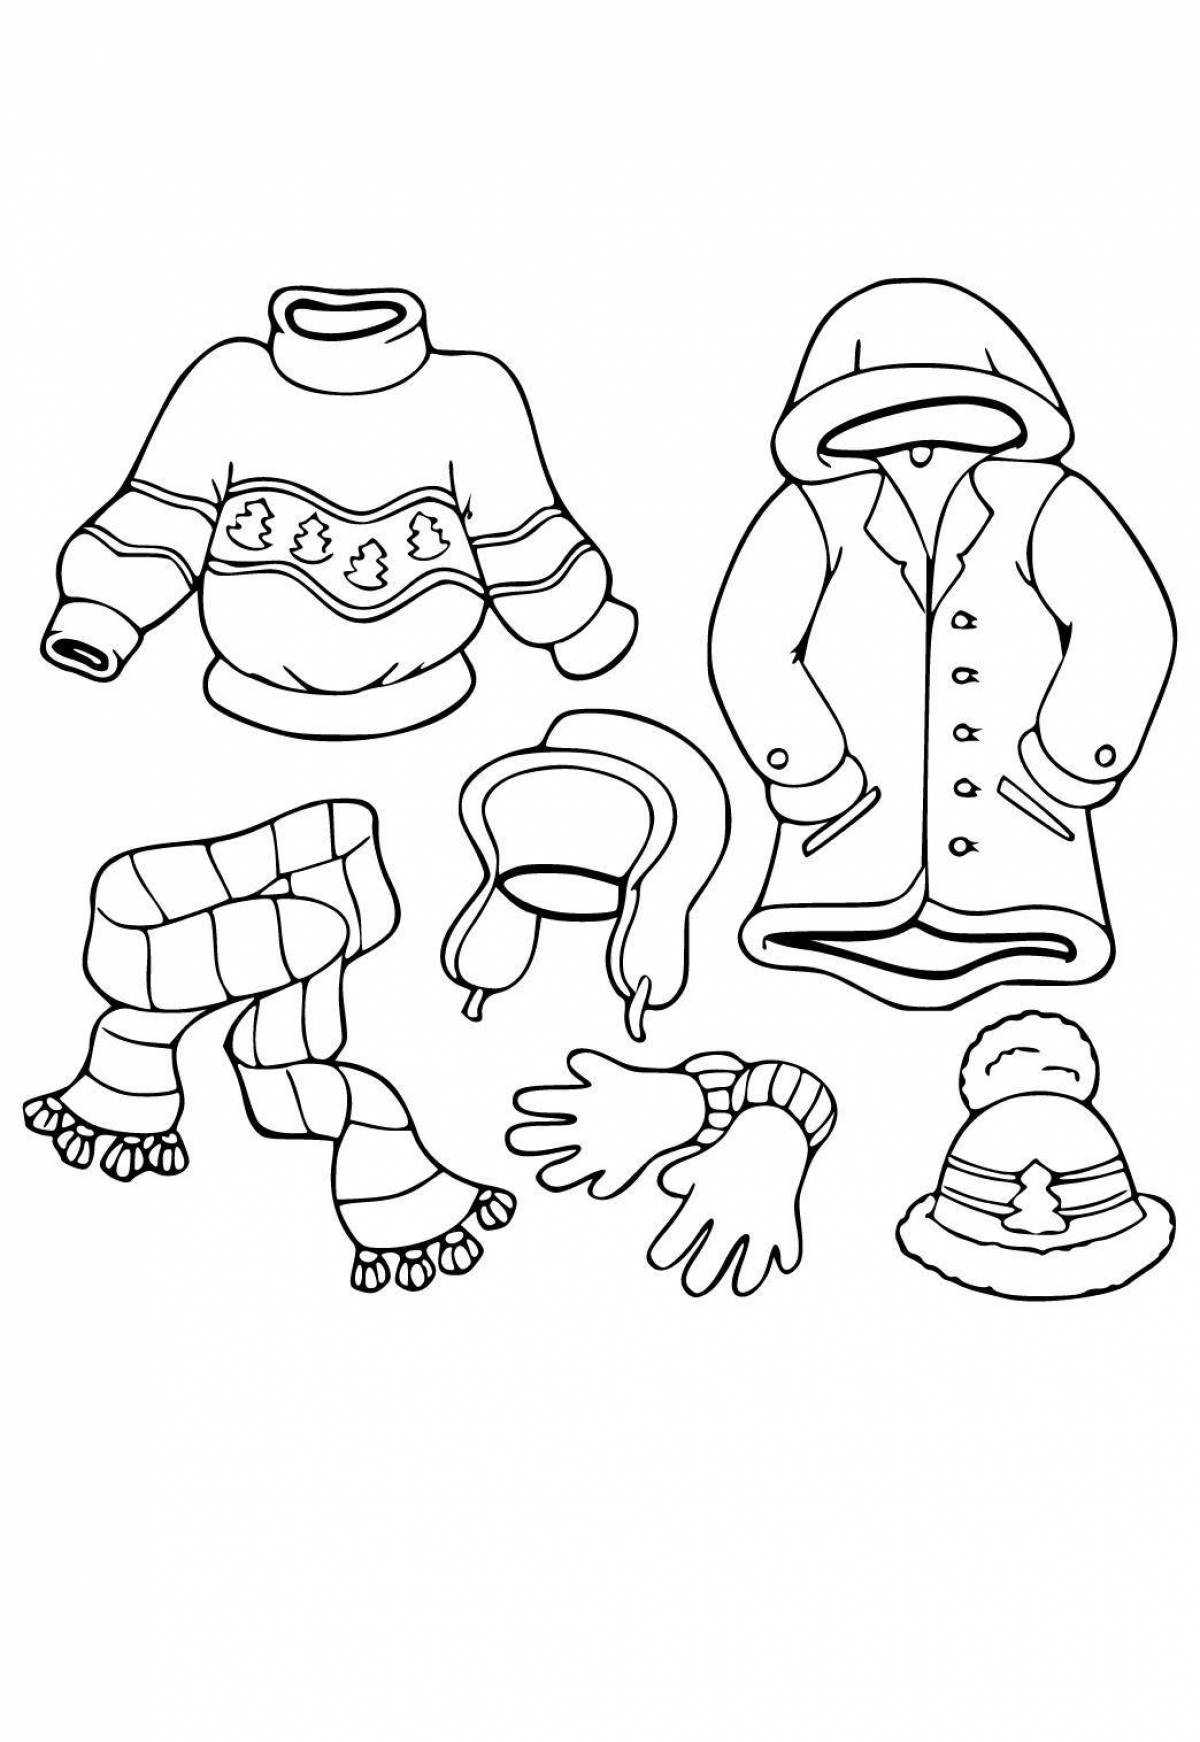 Winter clothes for kids #13